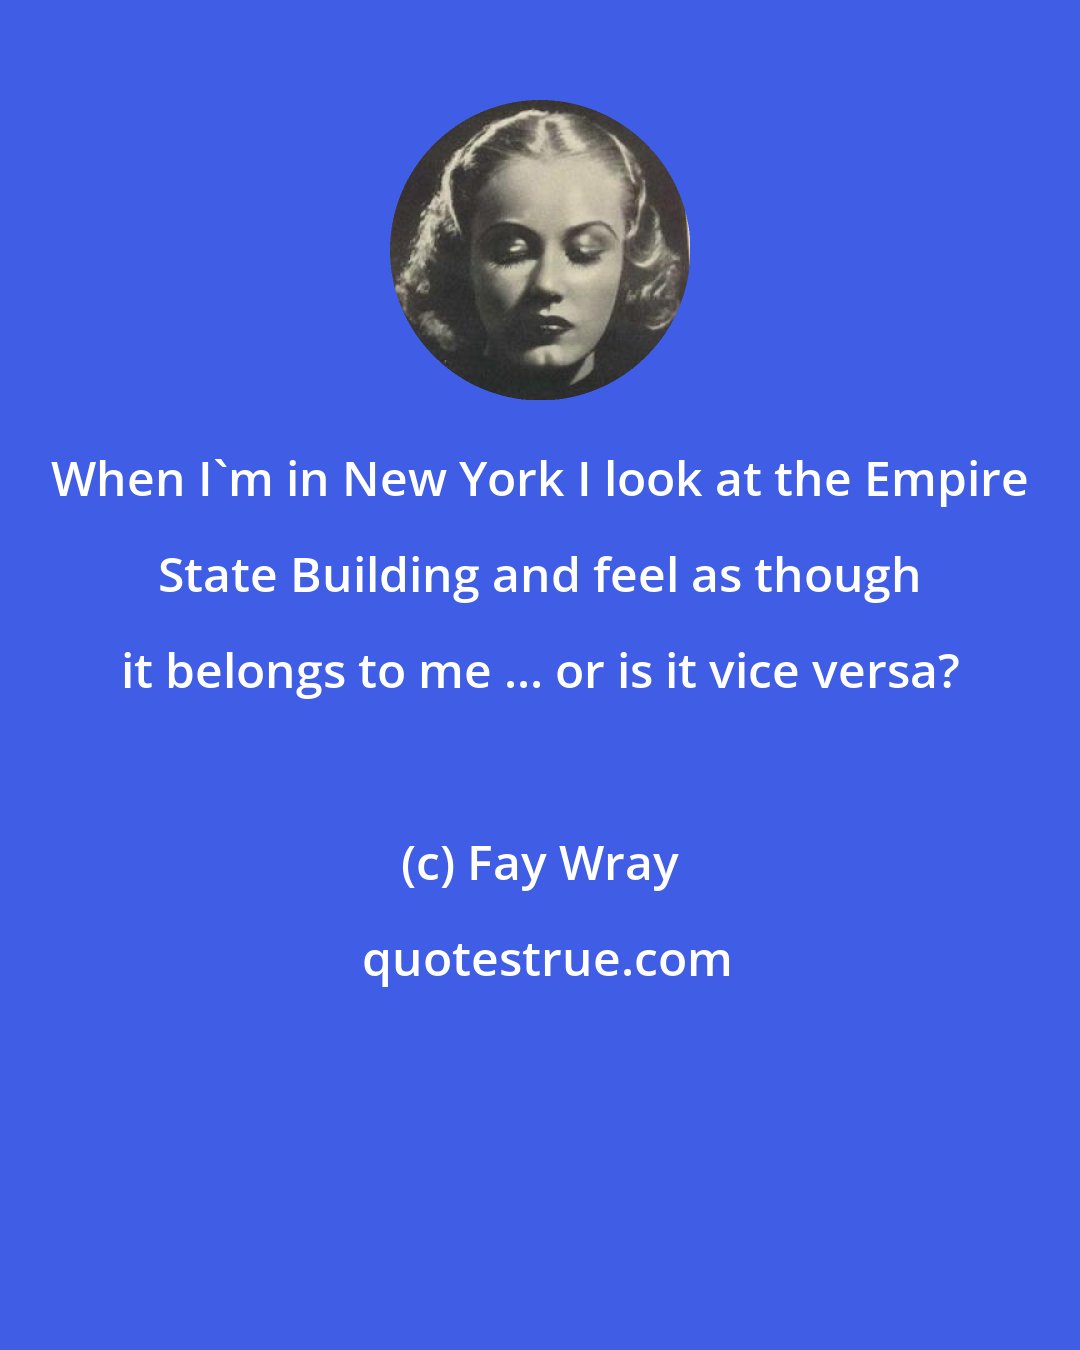 Fay Wray: When I'm in New York I look at the Empire State Building and feel as though it belongs to me ... or is it vice versa?